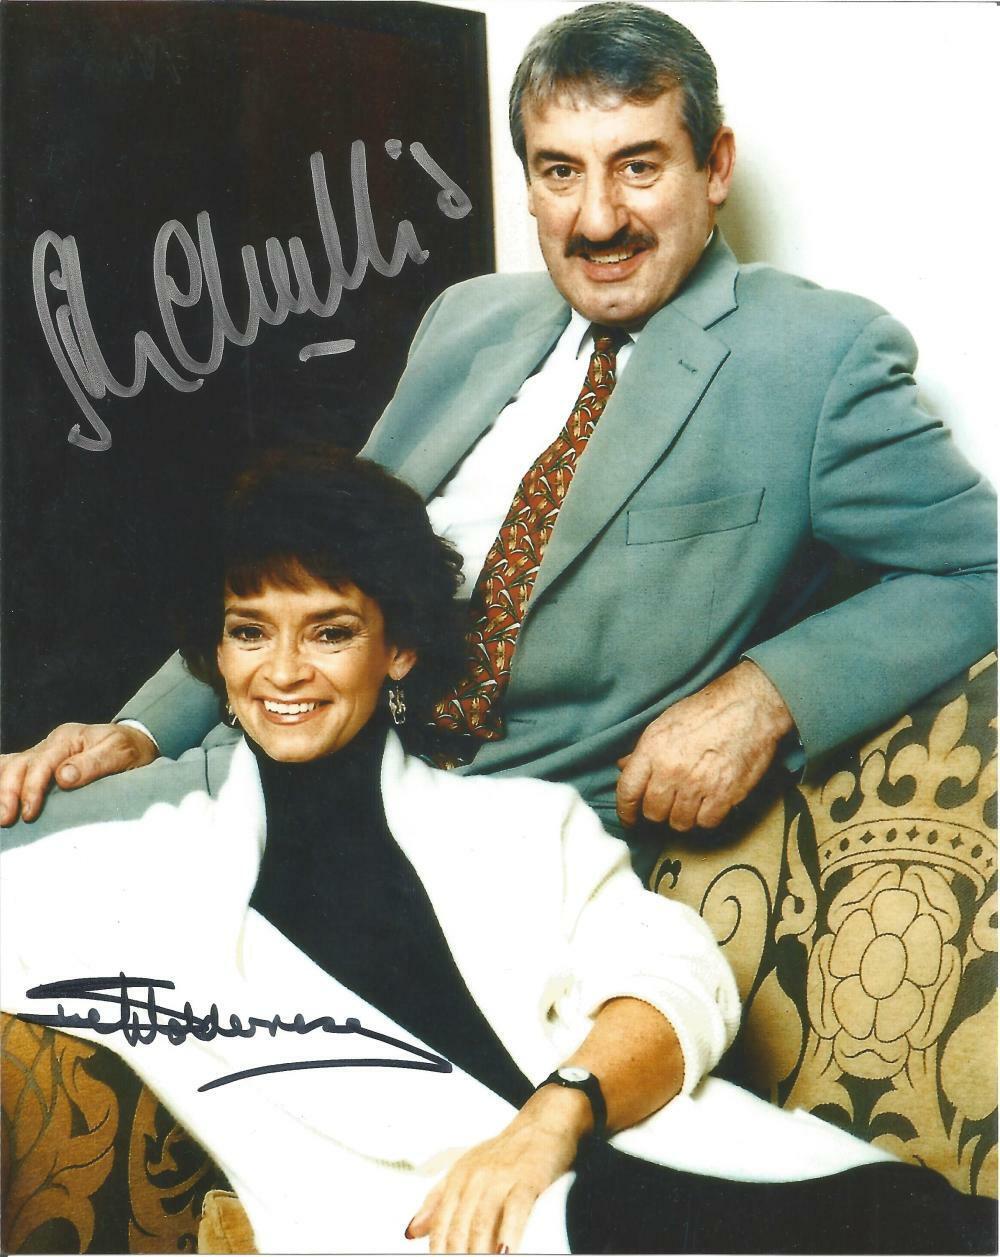 JOHN CHALLIS & SUE HOLDERNESS Signed Photo Poster paintinggraph - ONLY FOOLS & HORSES - preprint